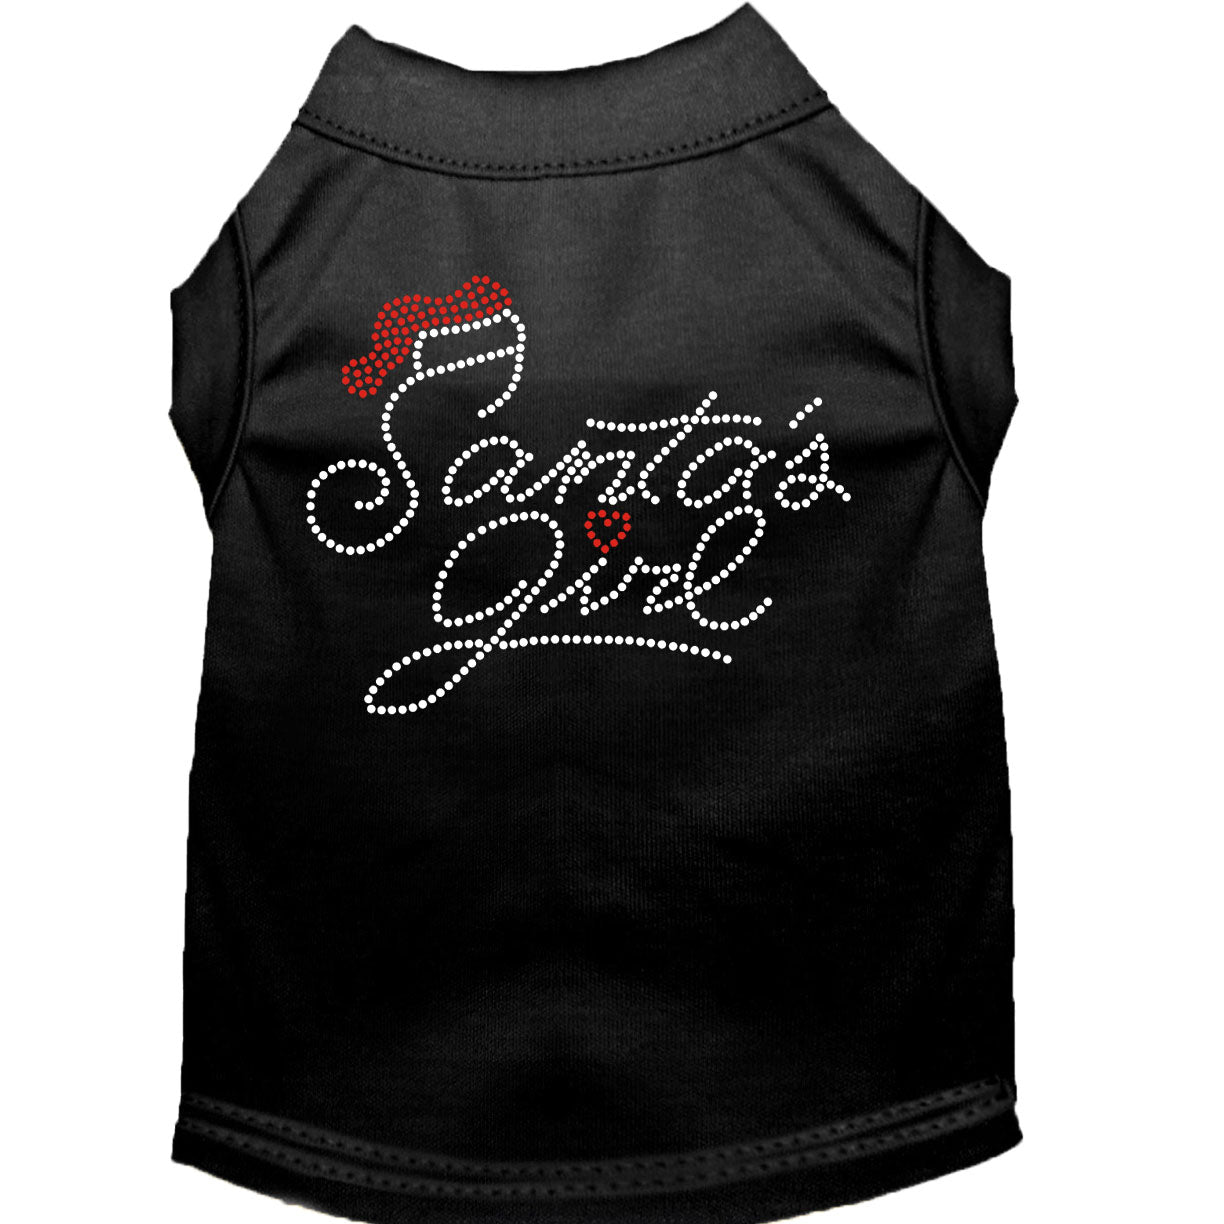 Santa's Girl Rhinestone Shirts for Cats and Dogs